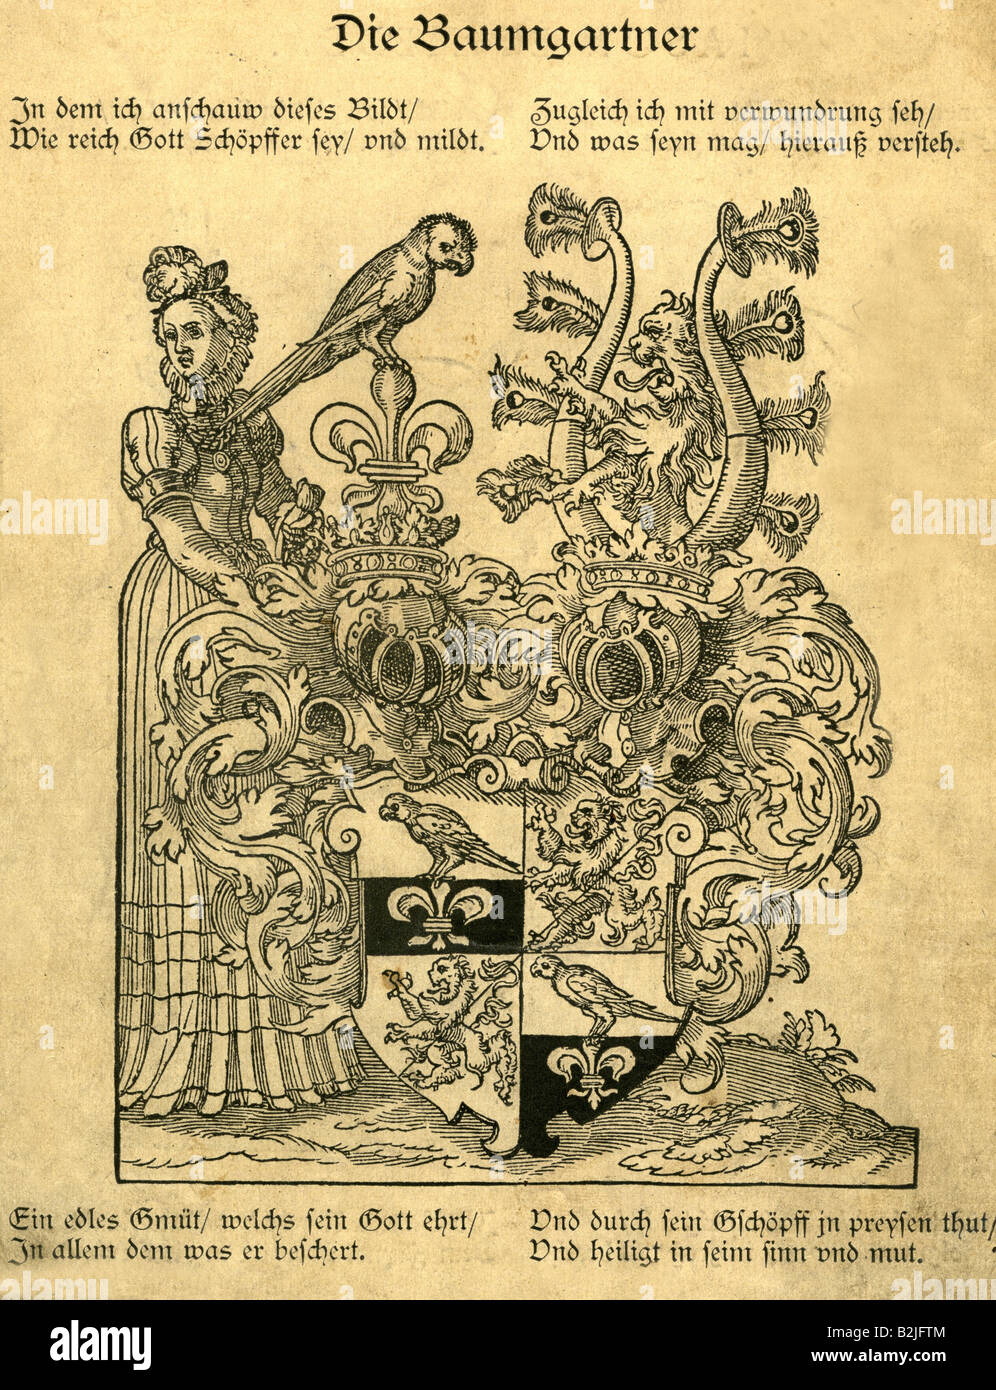 heraldry, coat of arms, Germany, Baumgartner family, copper engraving, 16th century, crest, supporters, helmet, lion, parrot, lily, historic, historical, people, Stock Photo